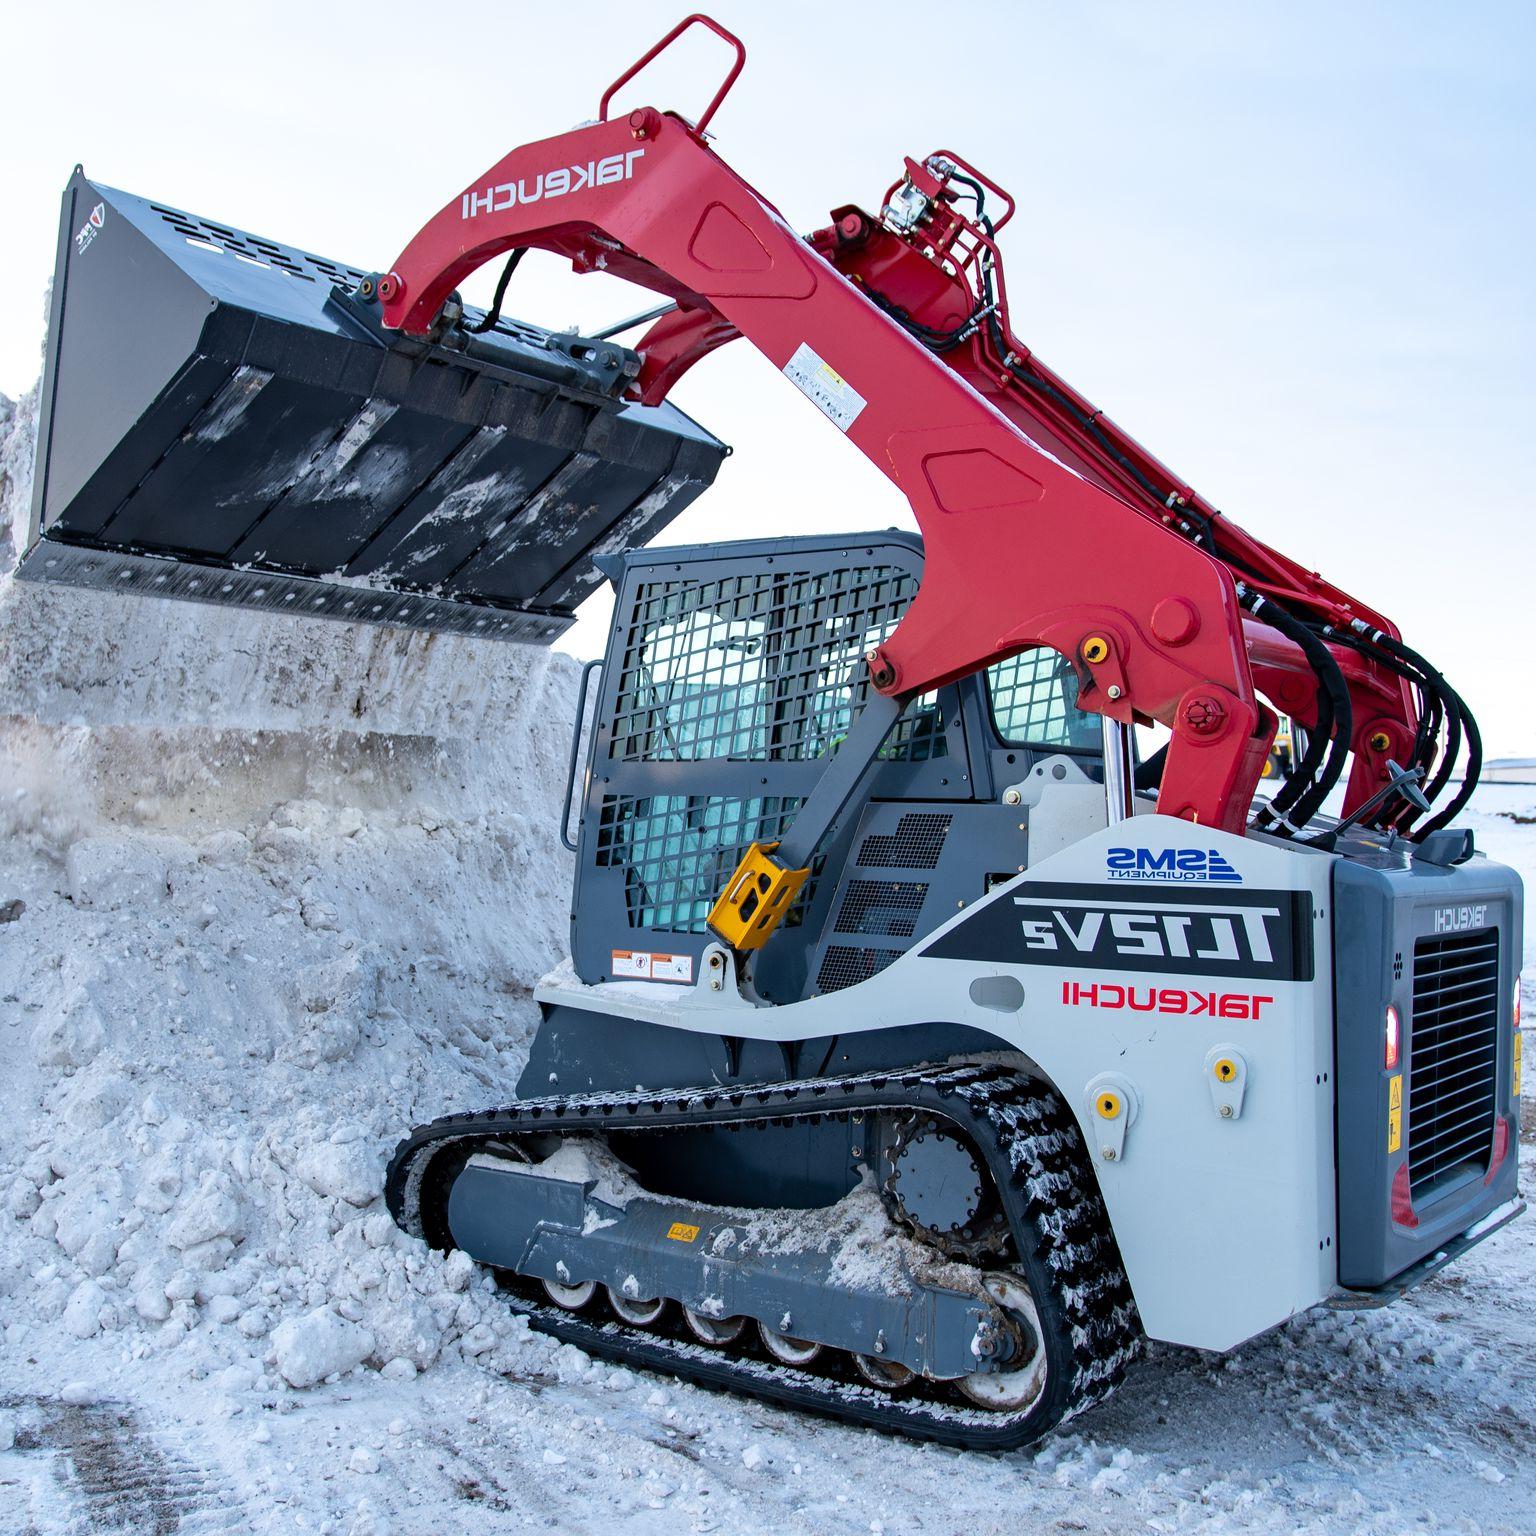 Takeuchi compact track loaders provide outstanding options for winter applications